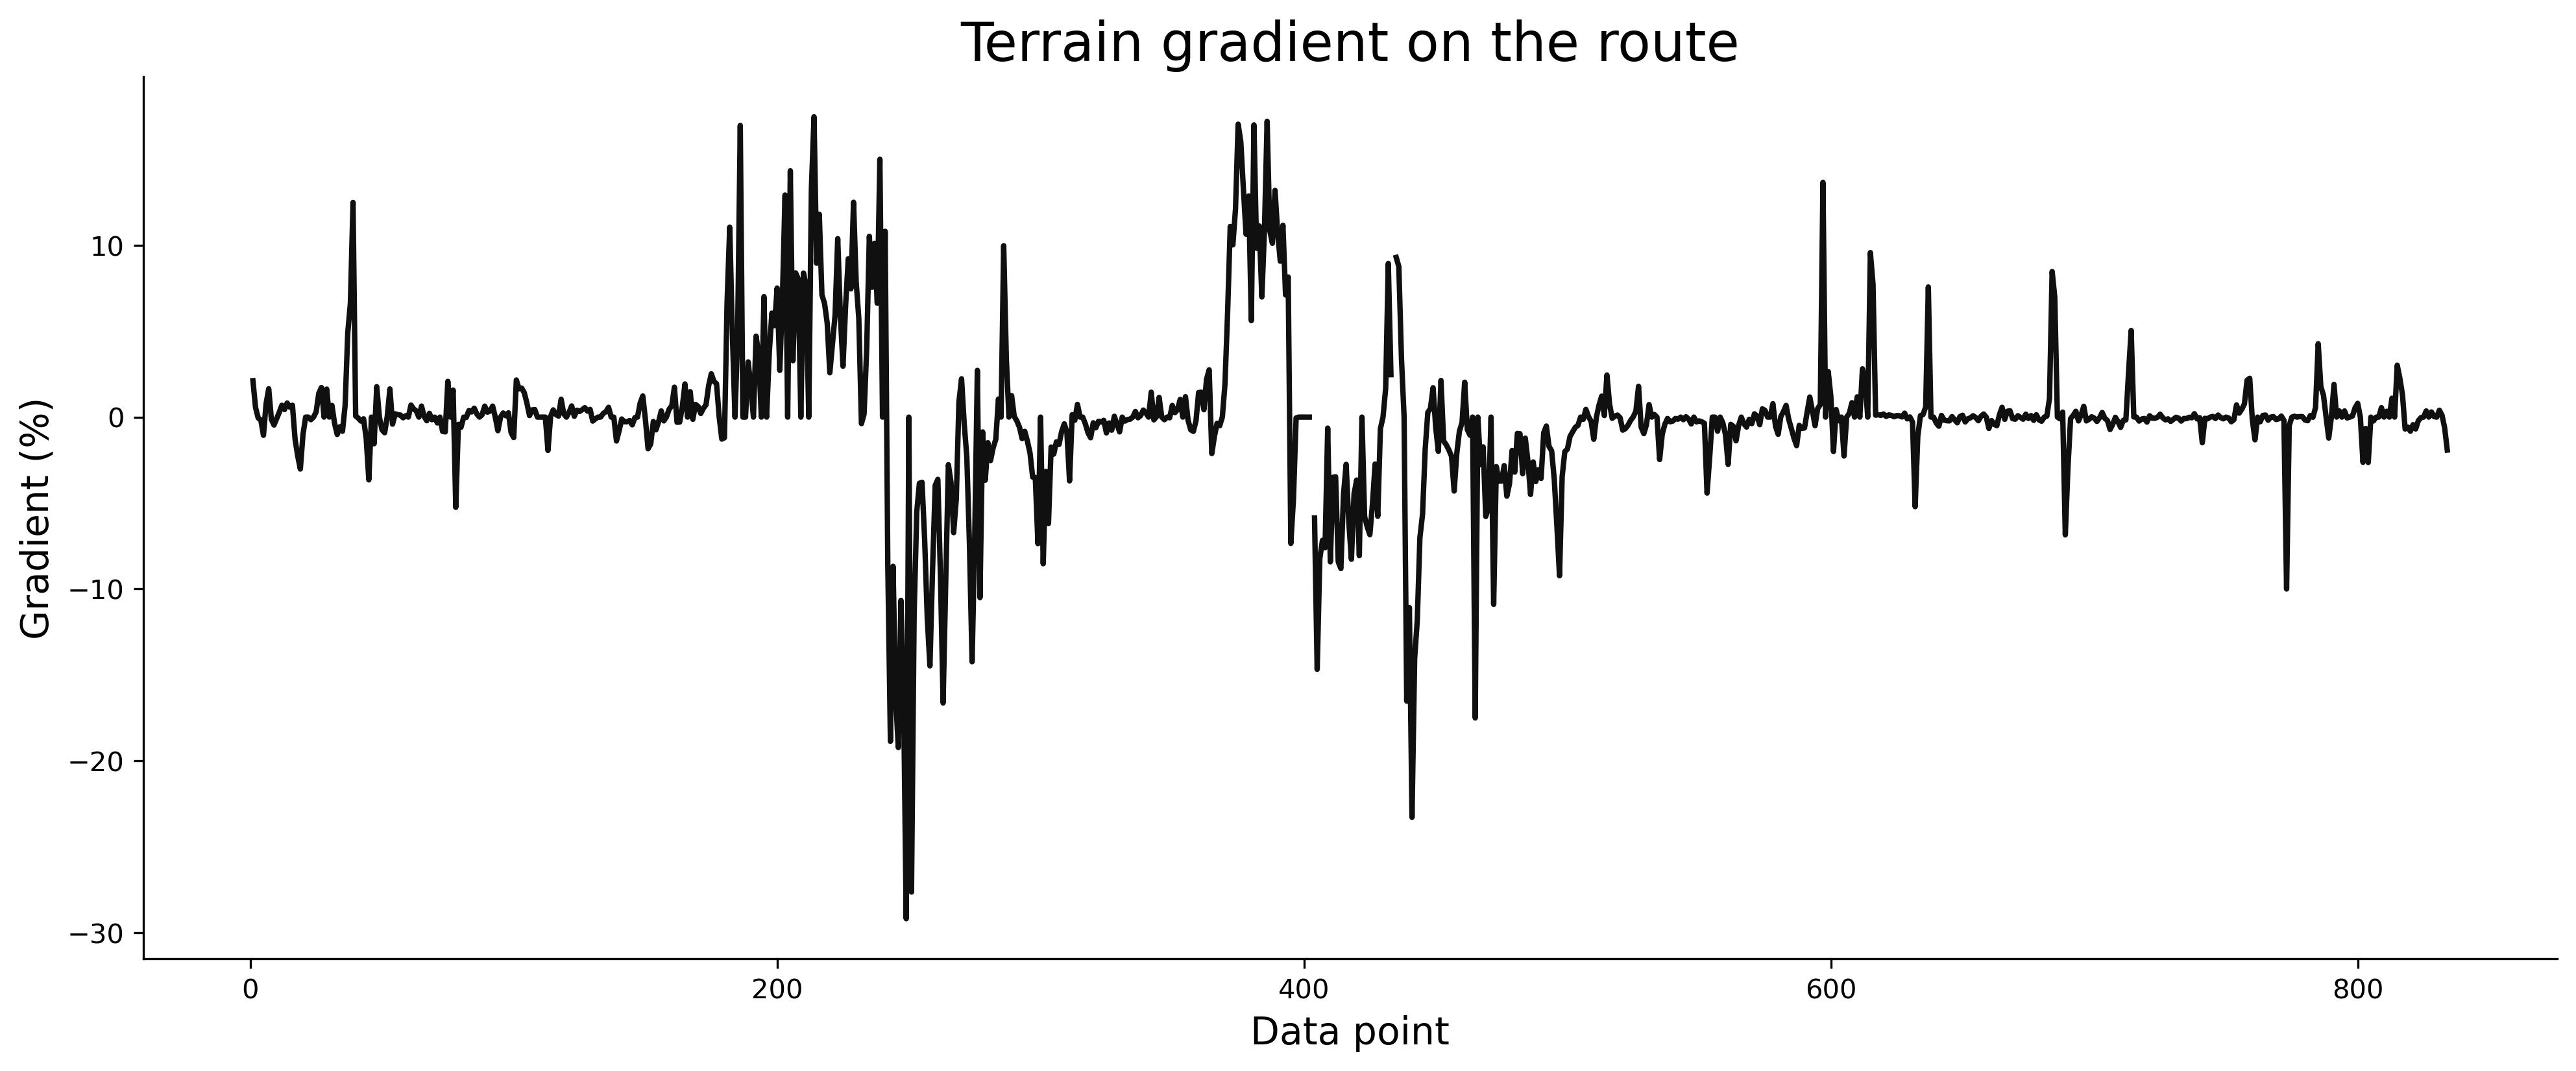 Image 4 - Estimated average route gradient v2 (image by author)